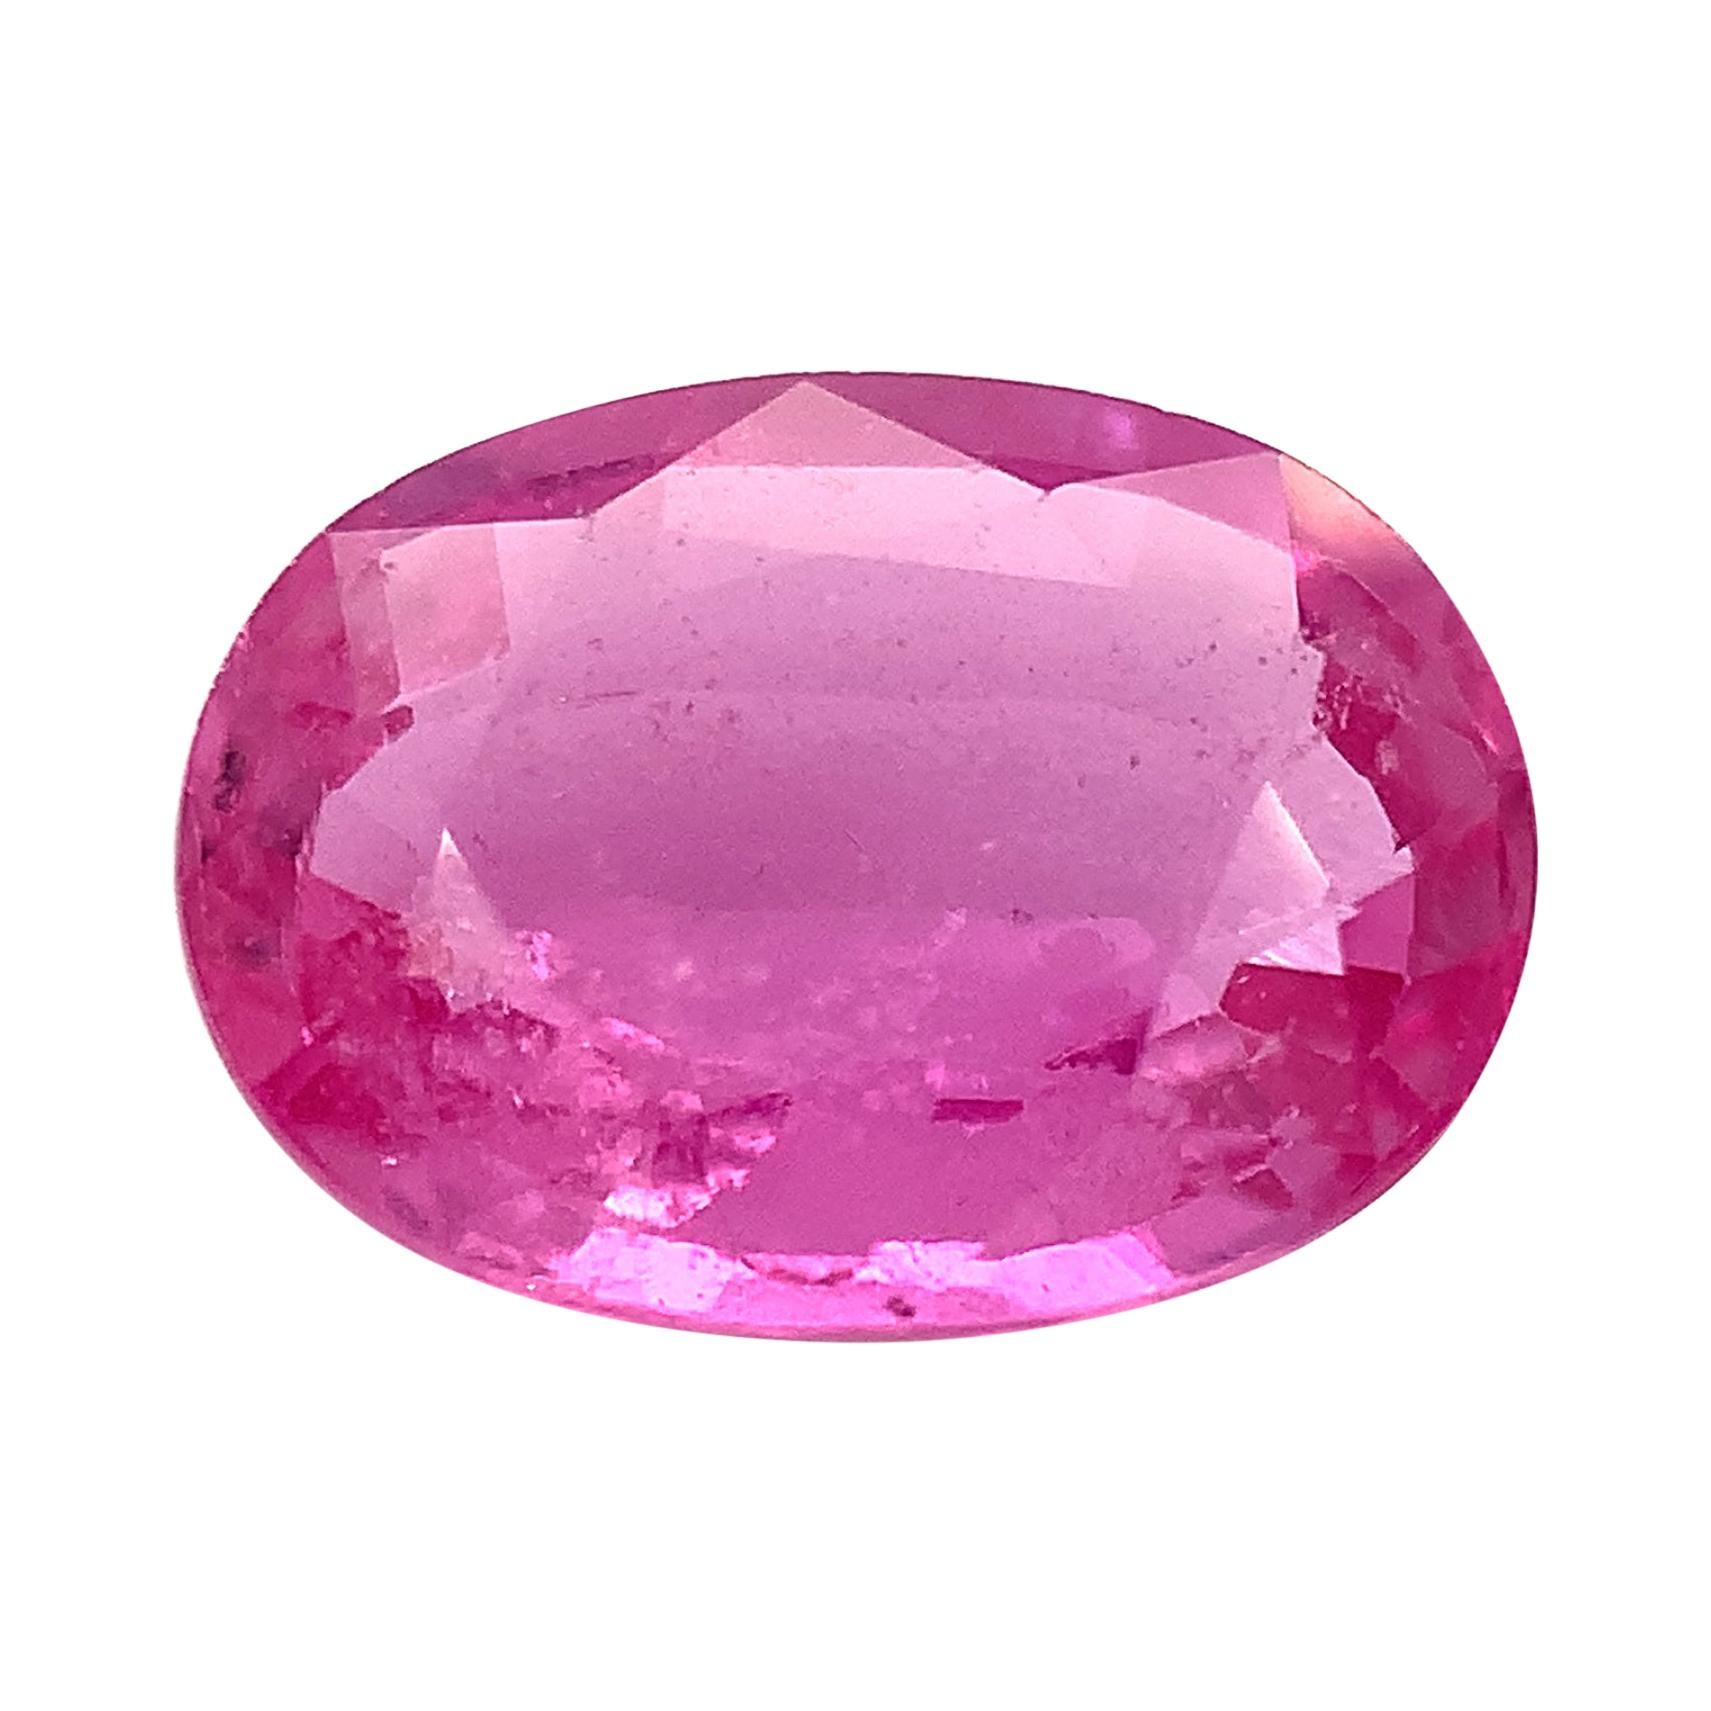 2.11 Carat Pink Sapphire Oval, Unset Loose Gemstone, GIA Certified  .....A